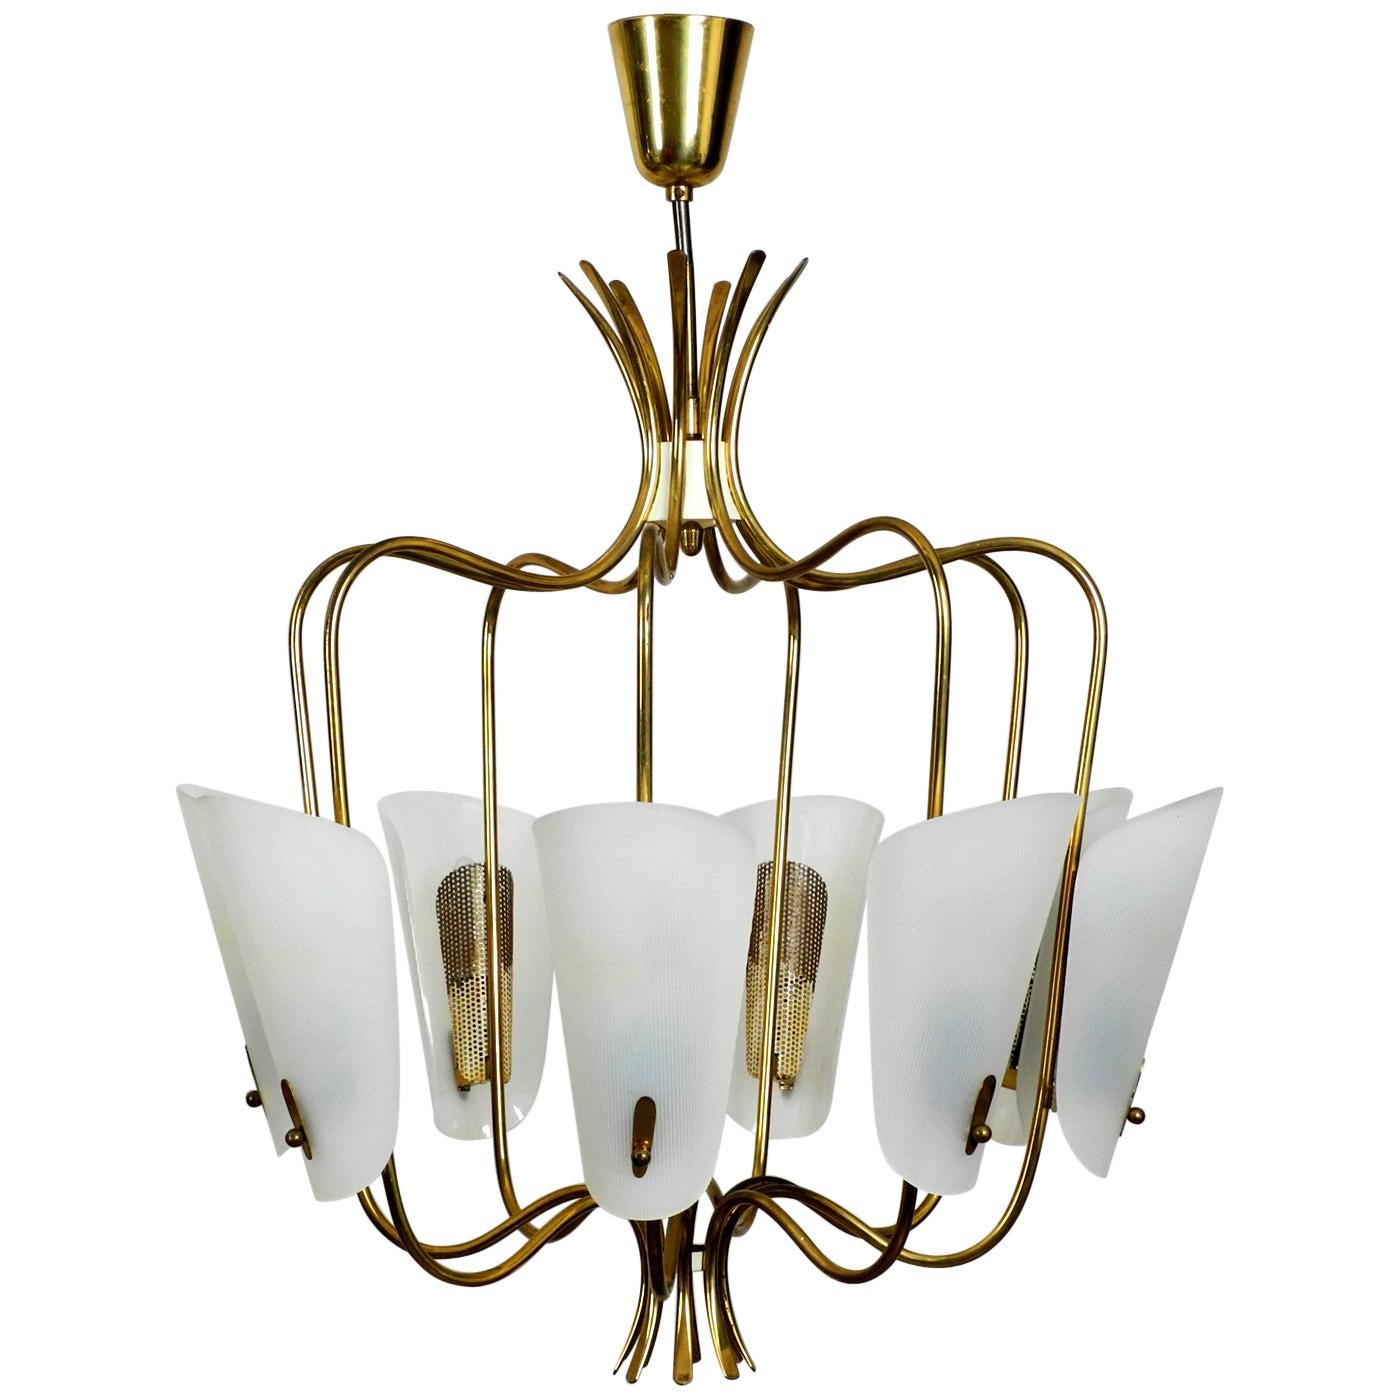 Large 8-Arm Mid-Century Modern Brass Chandelier with Large Plexiglass Shades For Sale